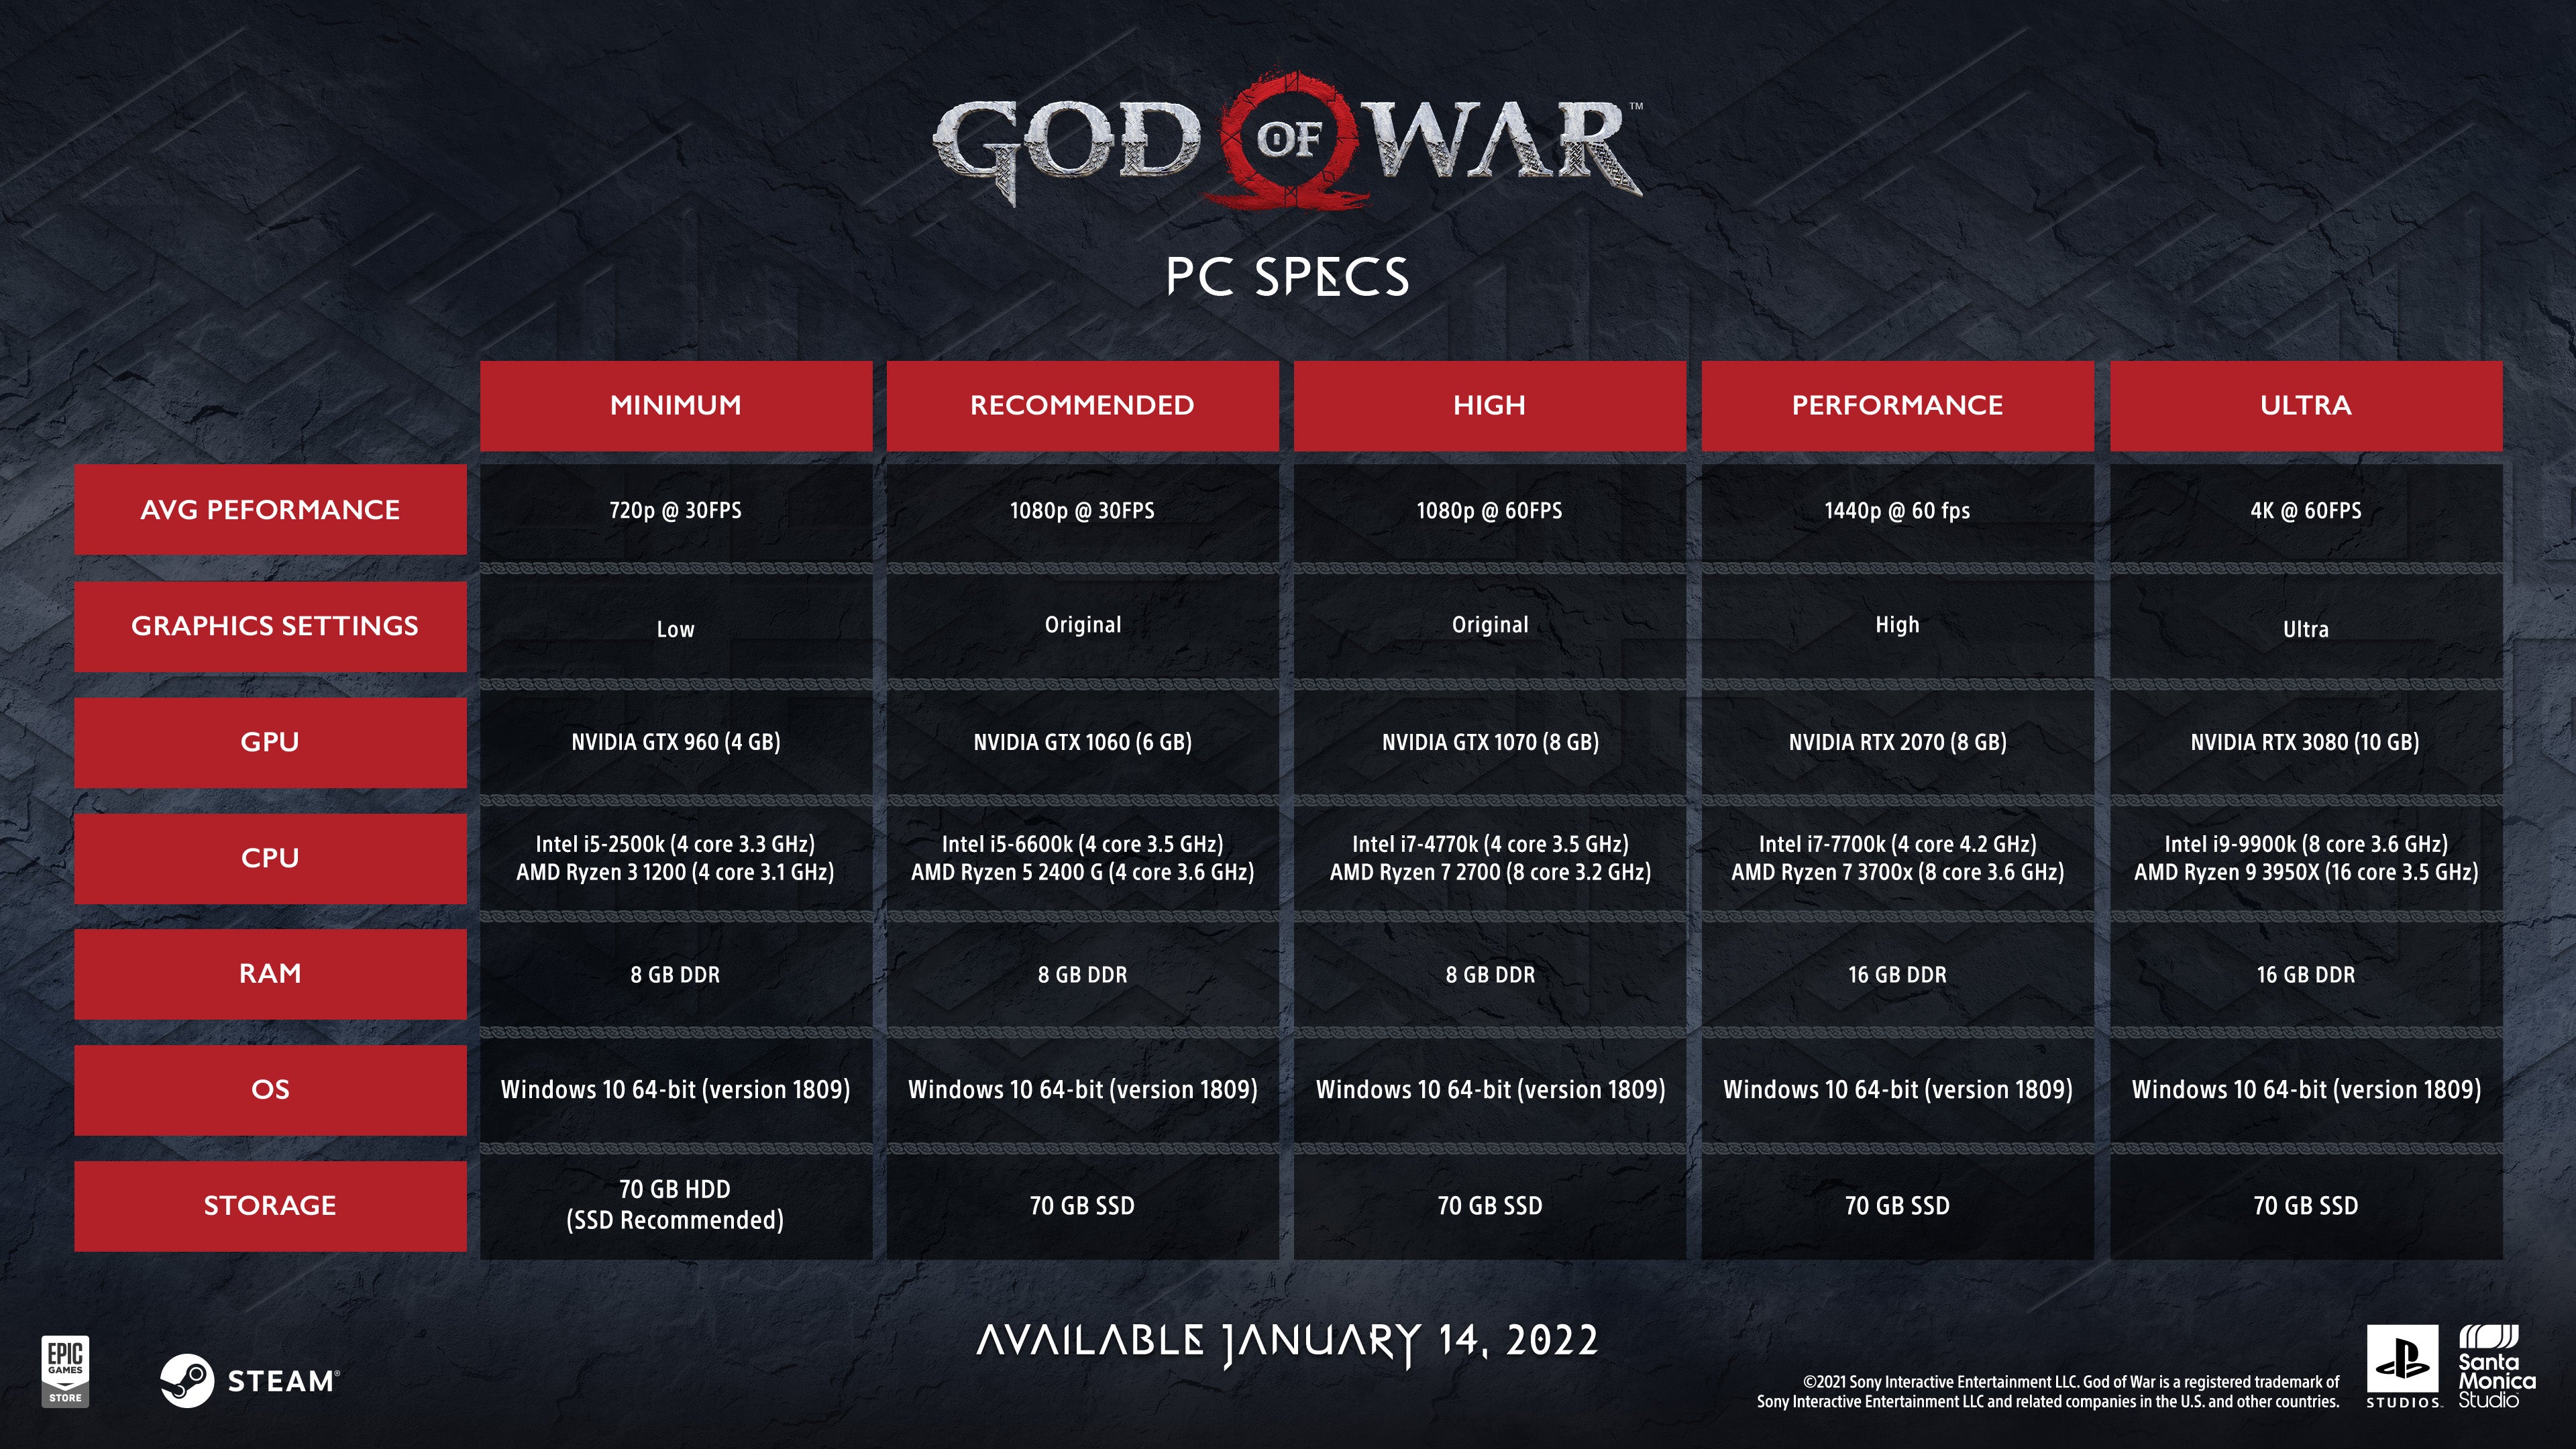 The PC recommended specs for God of War.